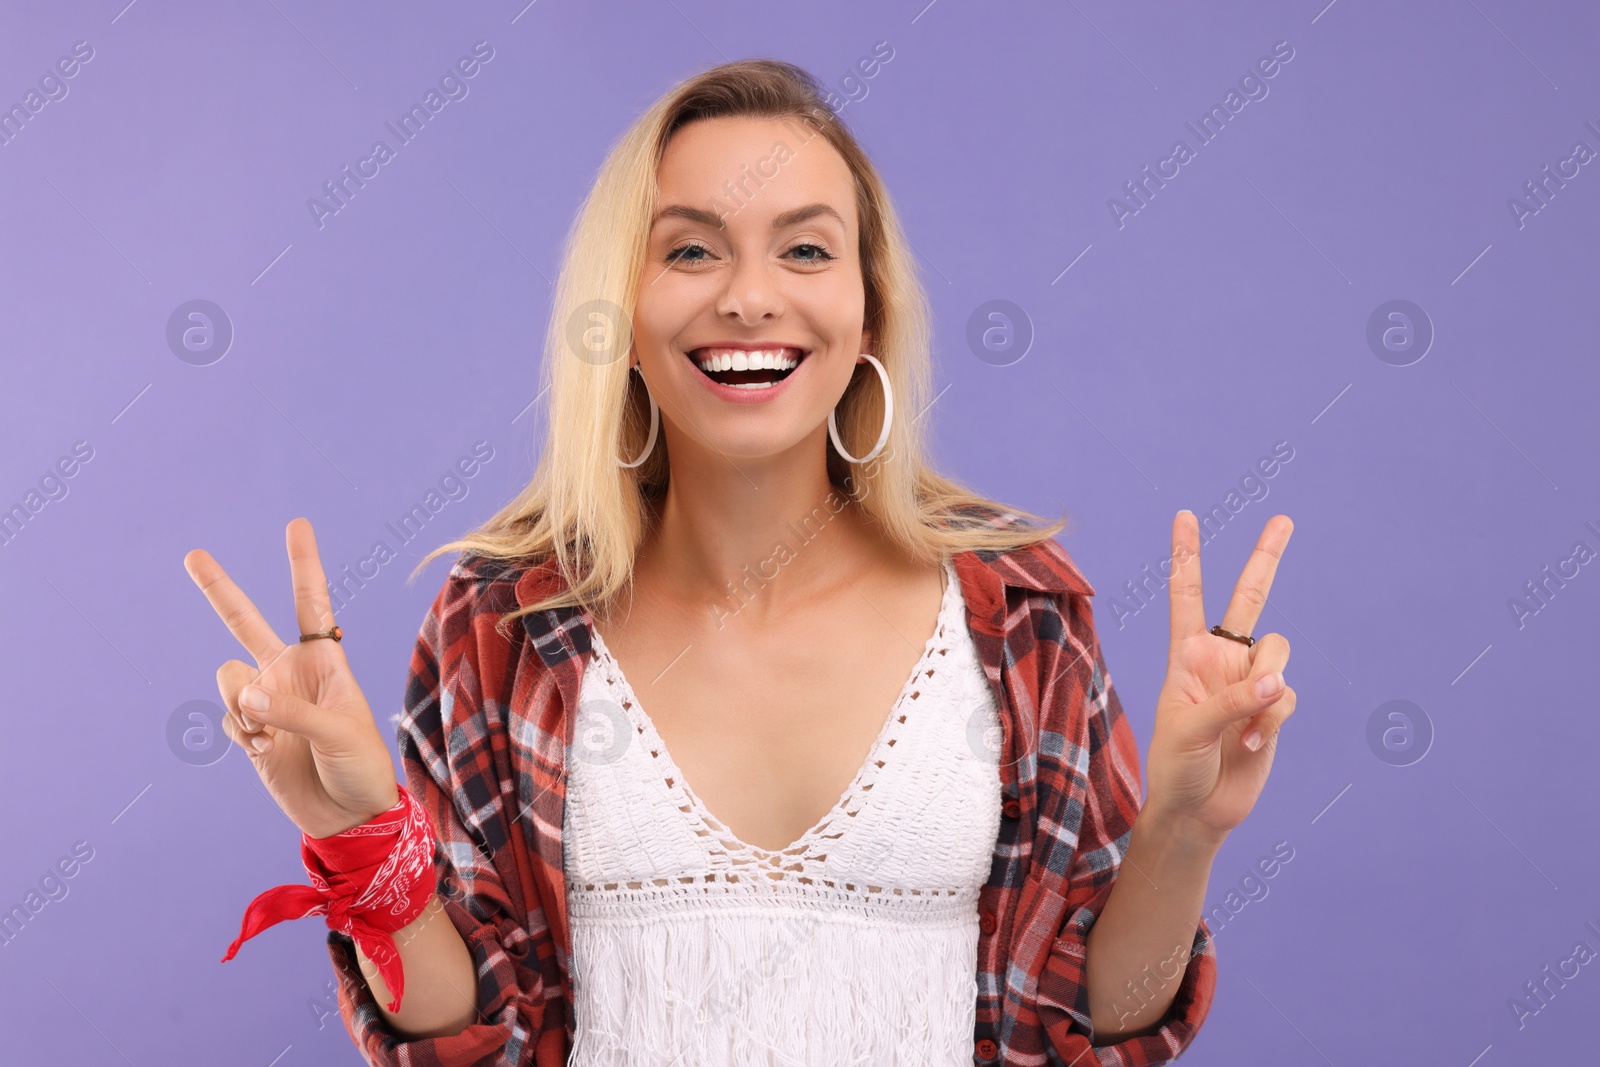 Photo of Portrait of happy hippie woman showing peace signs on purple background